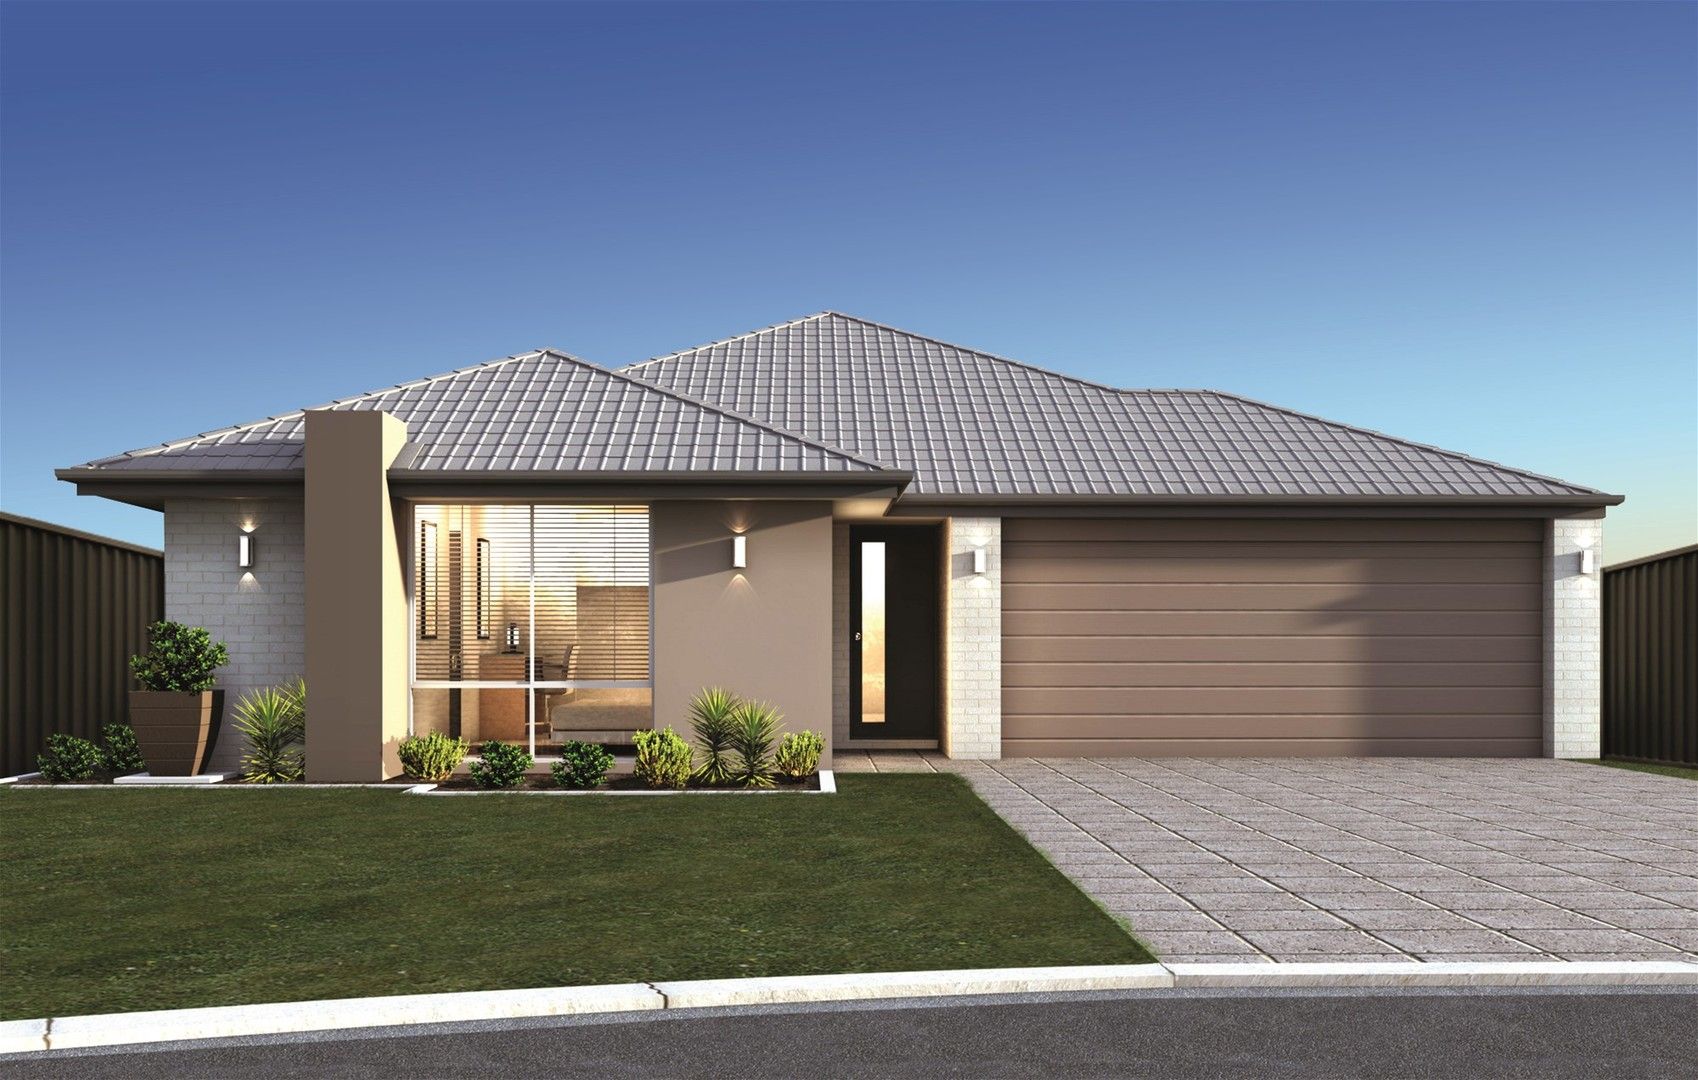 4 bedrooms New House & Land in Lot 110 Vincent Rd SINAGRA WA, 6065